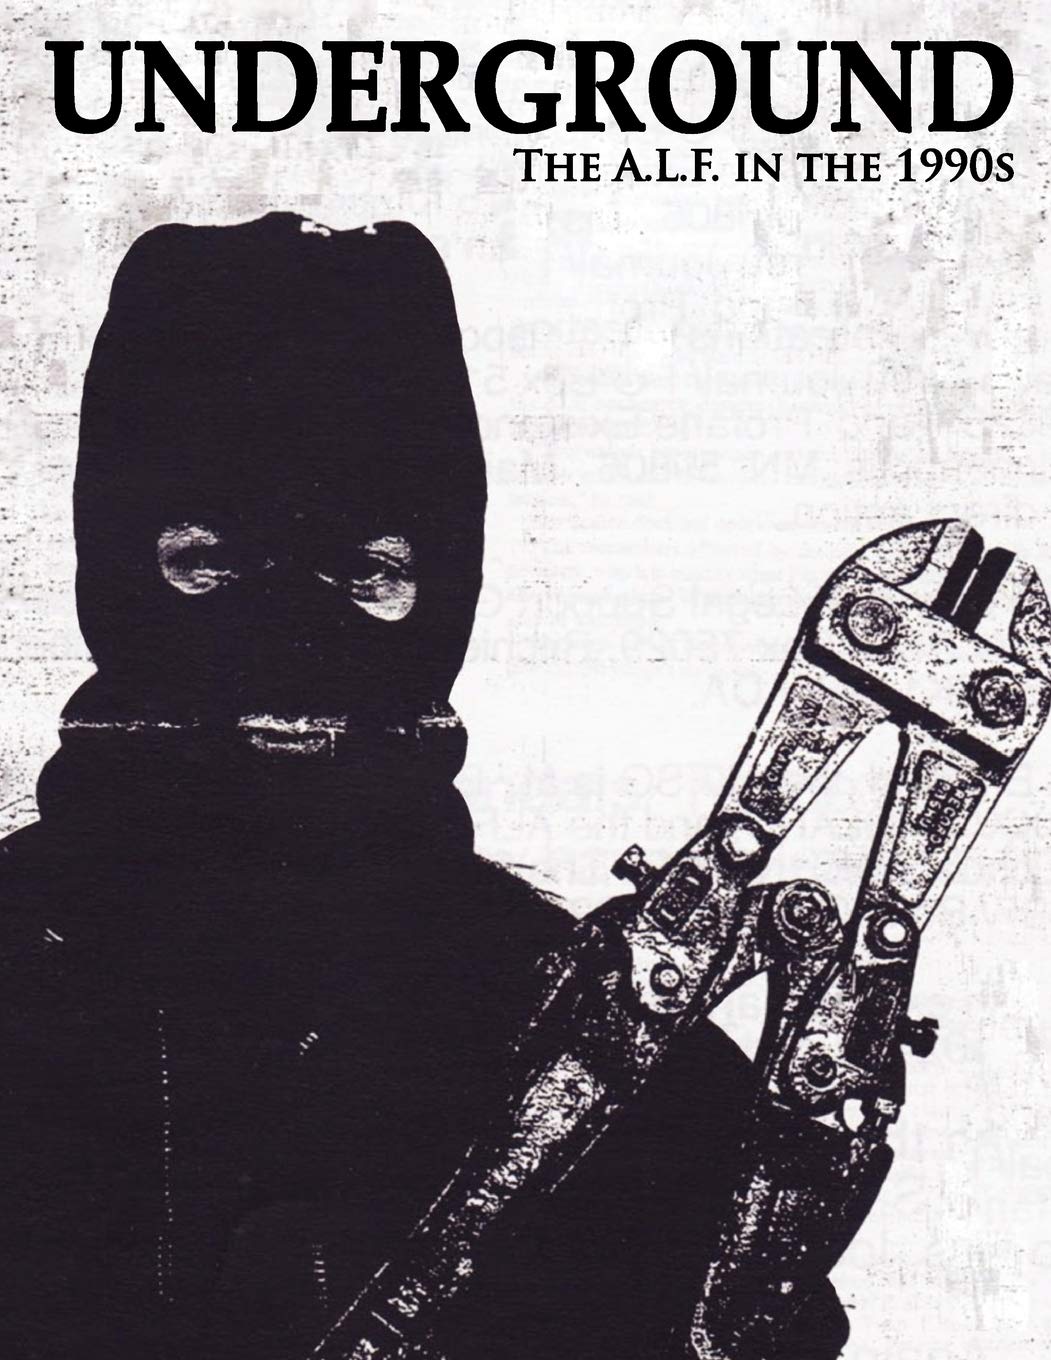 Peter Young, Animal Liberation Front, Rodney Coronado: Underground : Collected Issues of the A. L. F. Supporters Group Magazine : the Animal Liberation Front in the 1990s (2011, Roxby Media Limited)